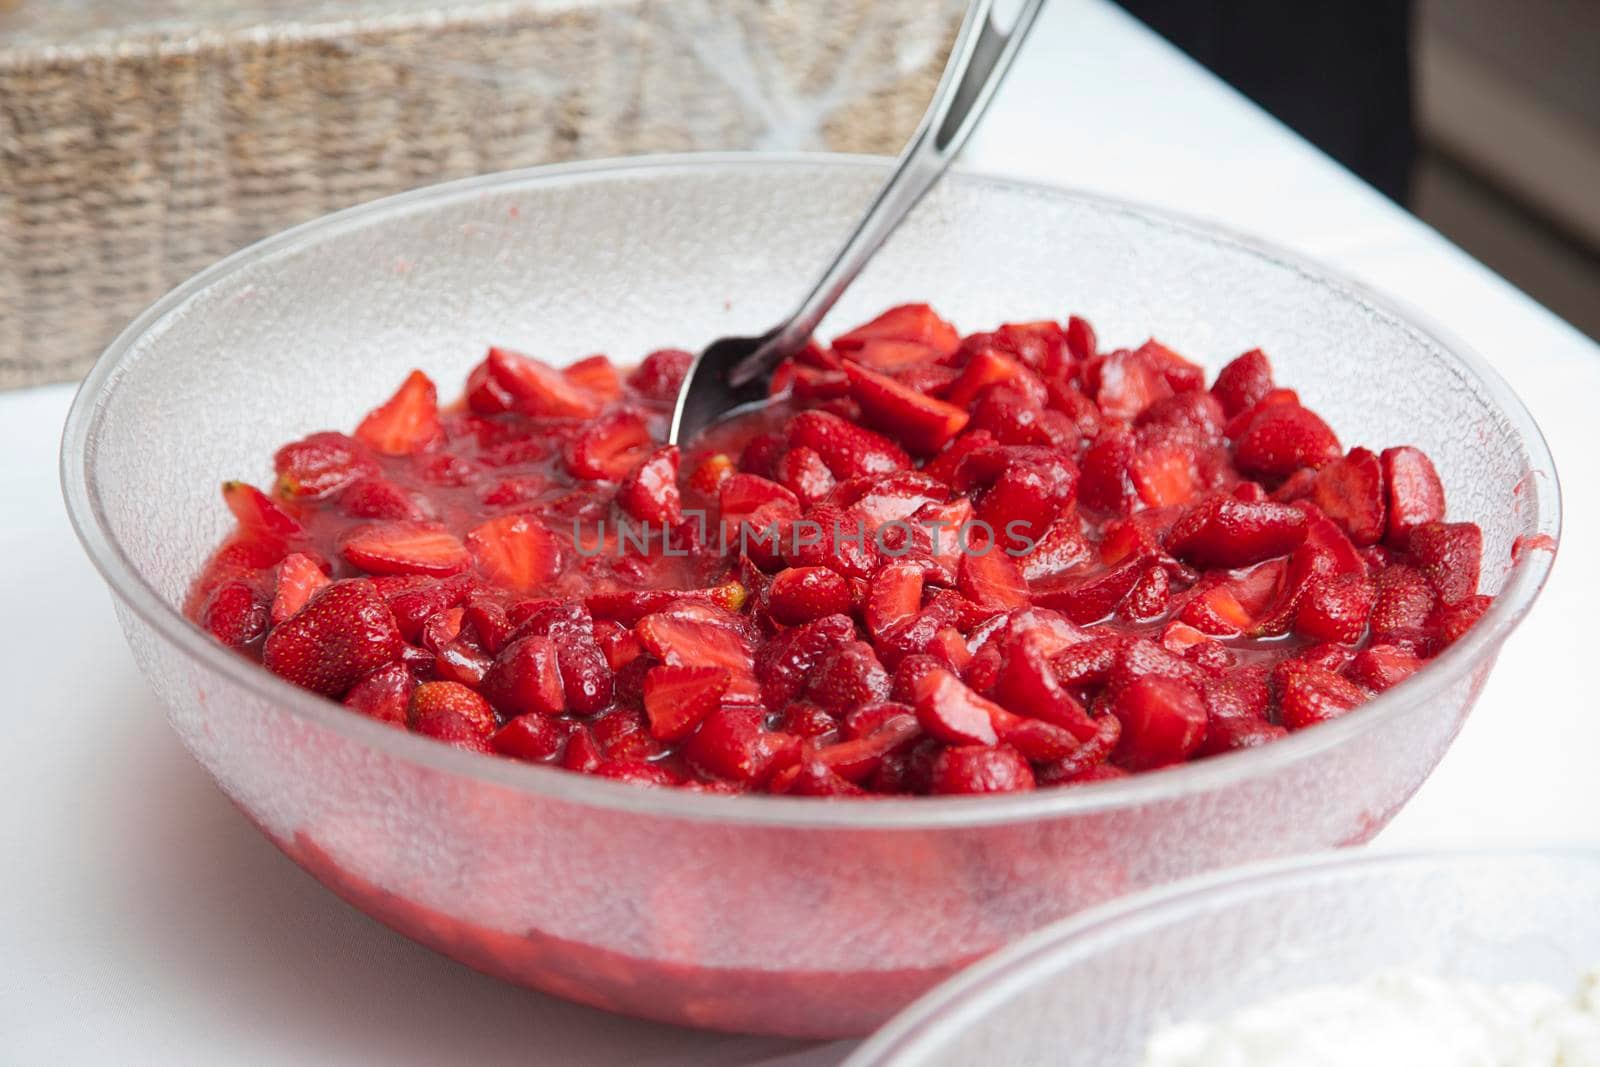 A large plastic dish of mashed strawberries with a spoon ready for dessert